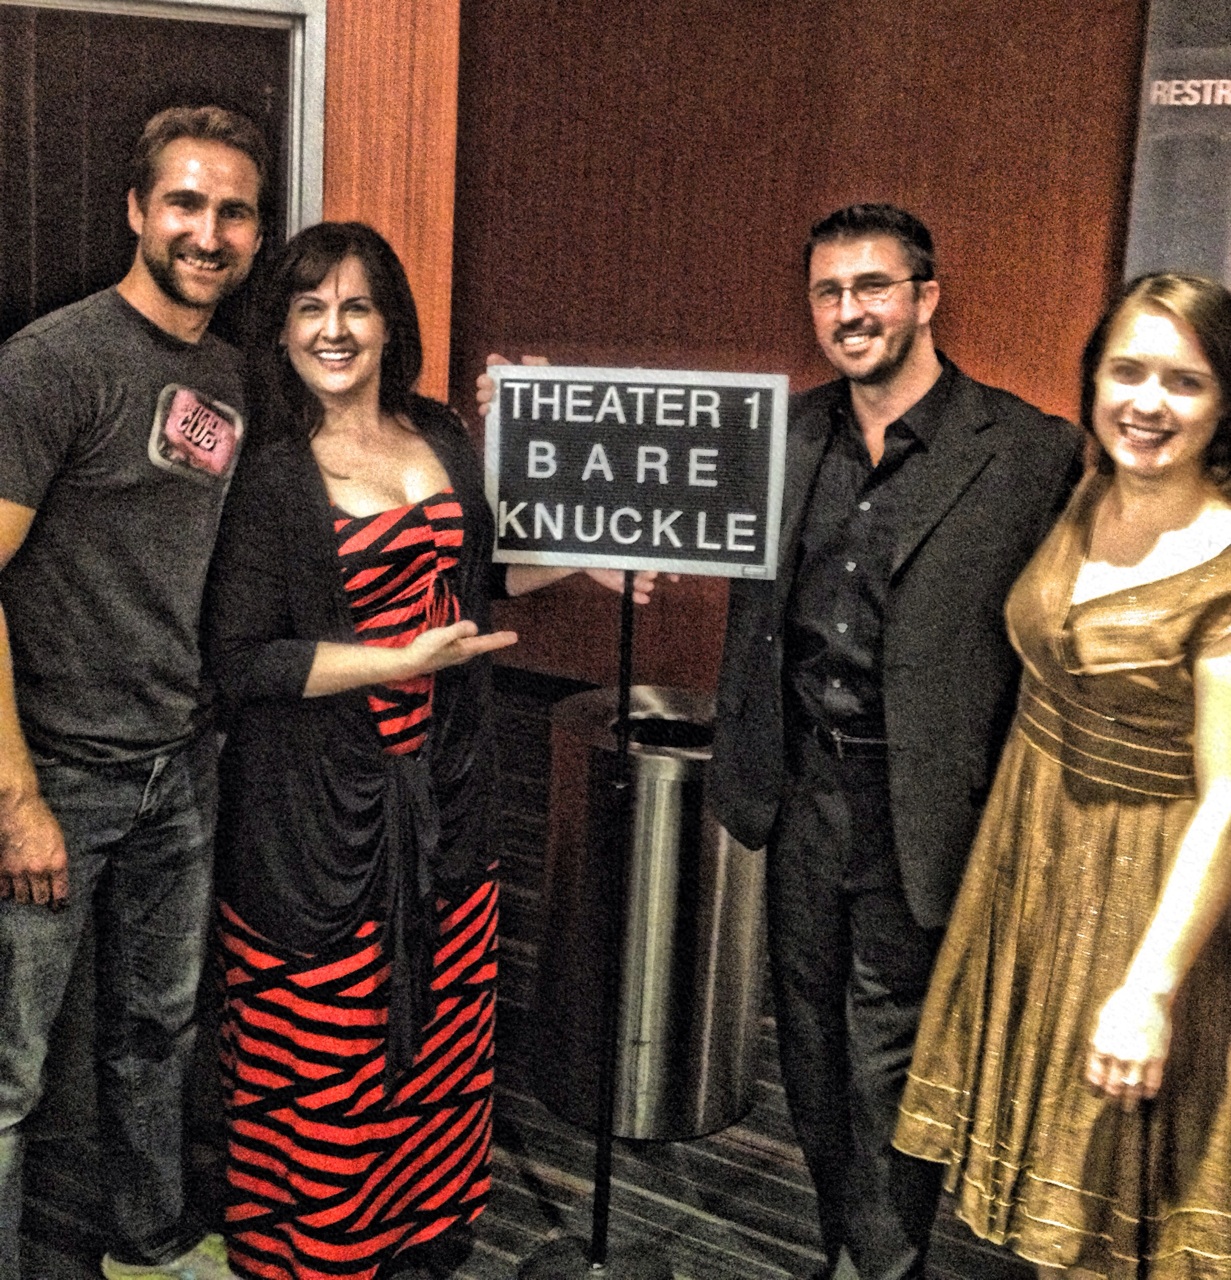 Cast and crew screening of BARE KNUCKLE